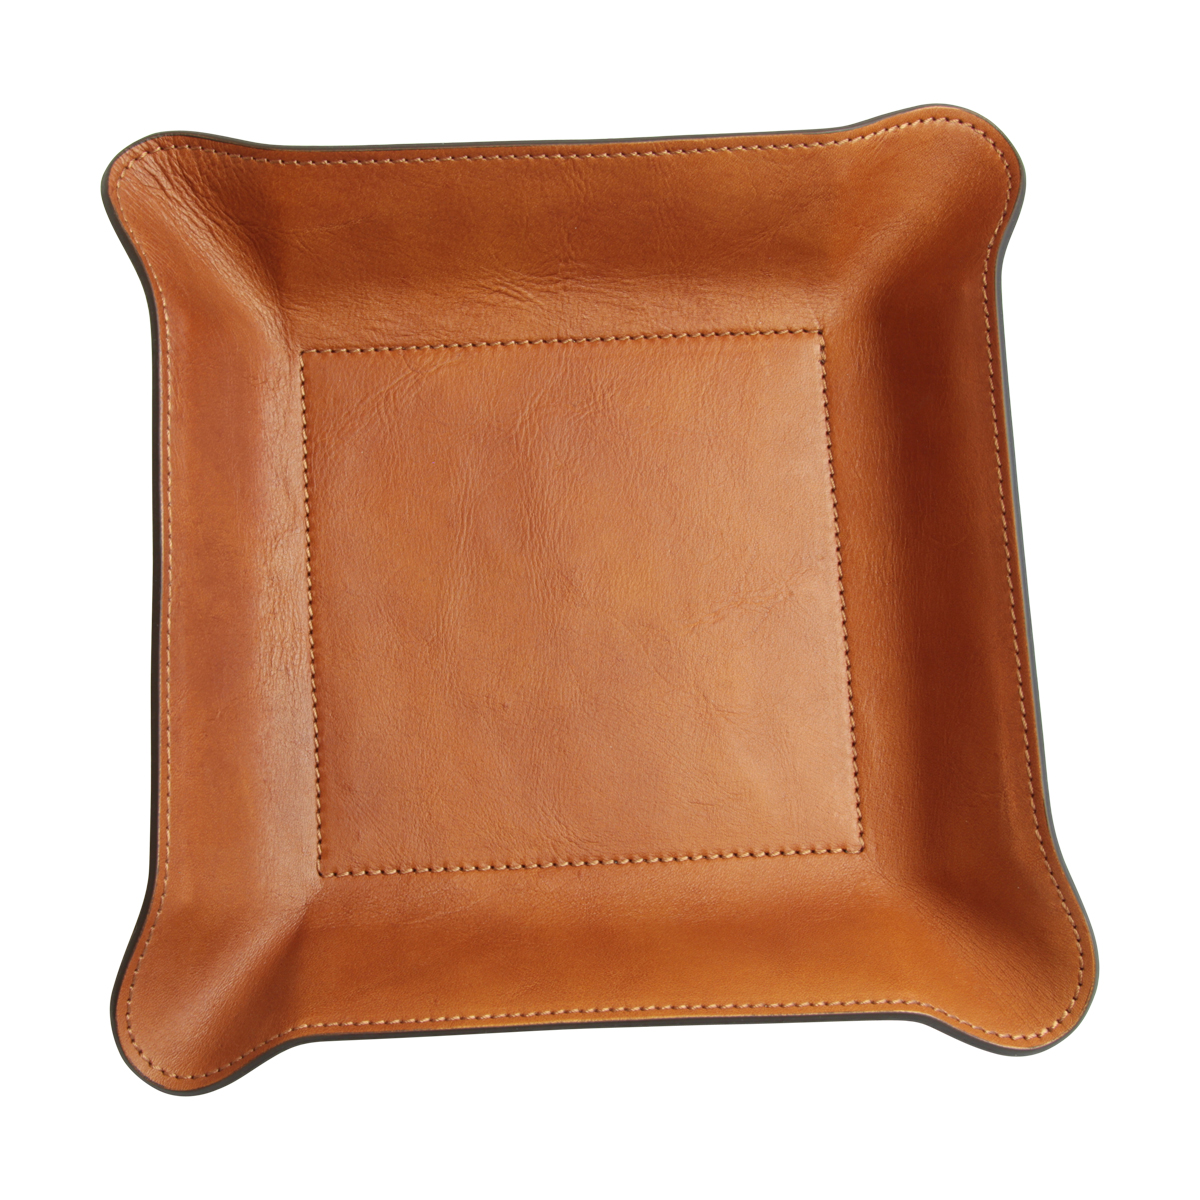 Leather Catchall Tray - Colonial Brown | 751089CO US | Old Angler Firenze